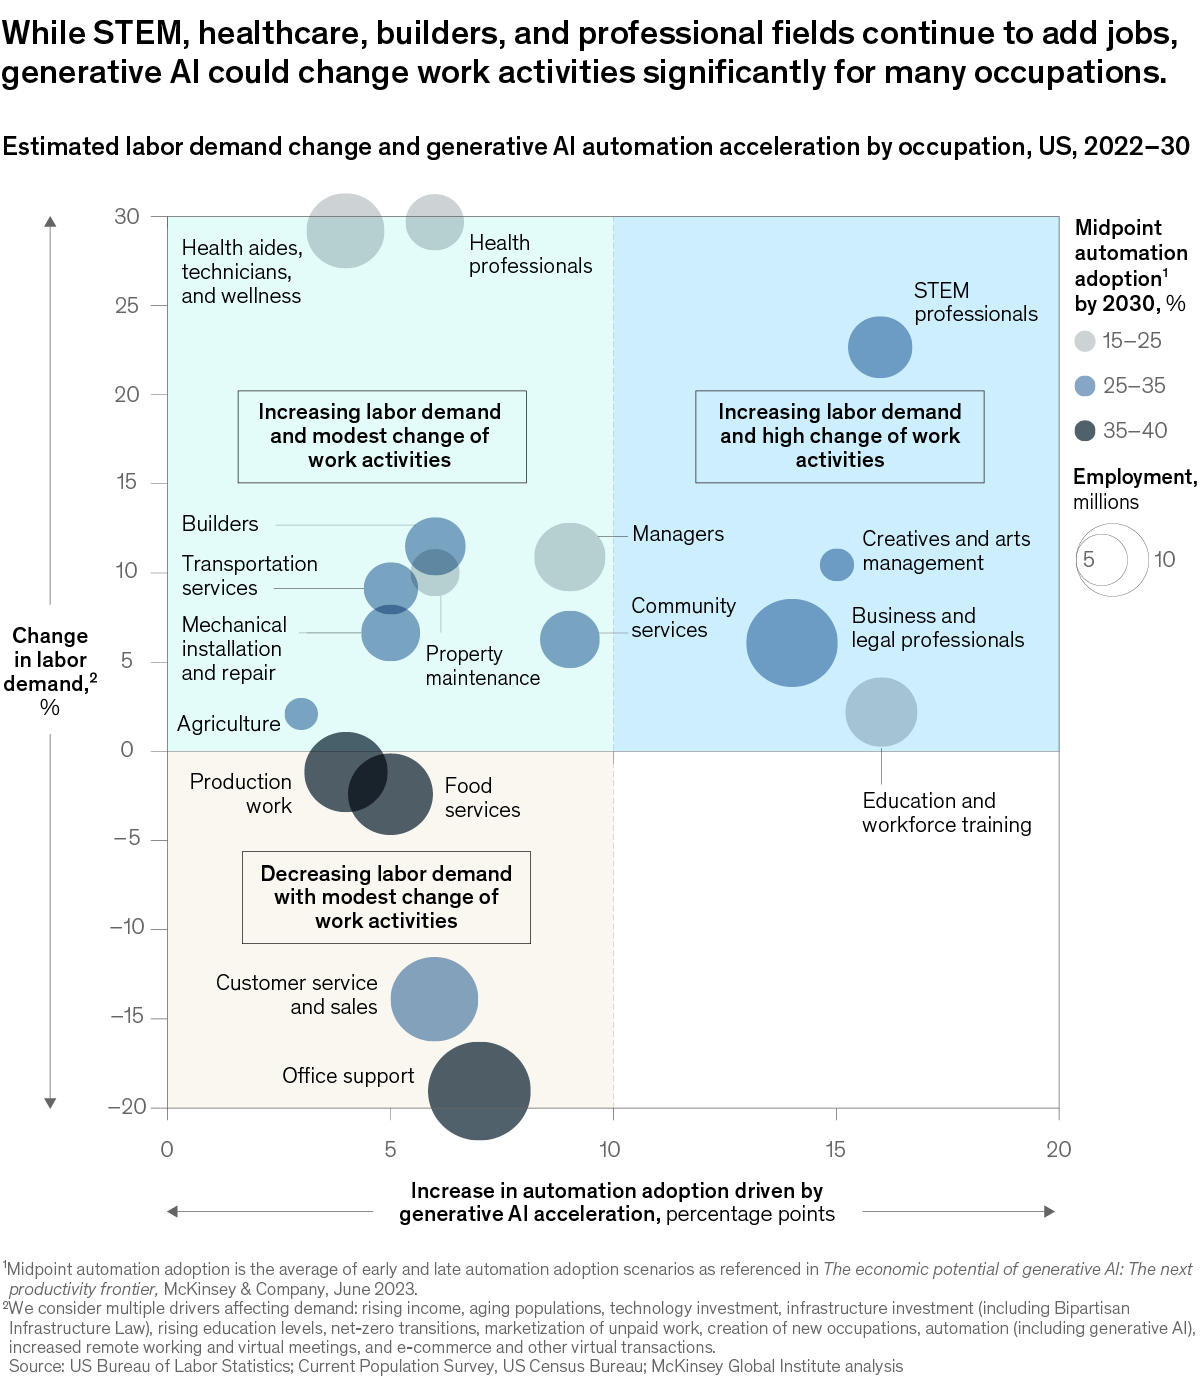 A chart titled “While STEM, healthcare, builders, and professional fields continue to add jobs generative AI could change work activities significantly formany occupations.” Click to open the full article on McKinsey.com.